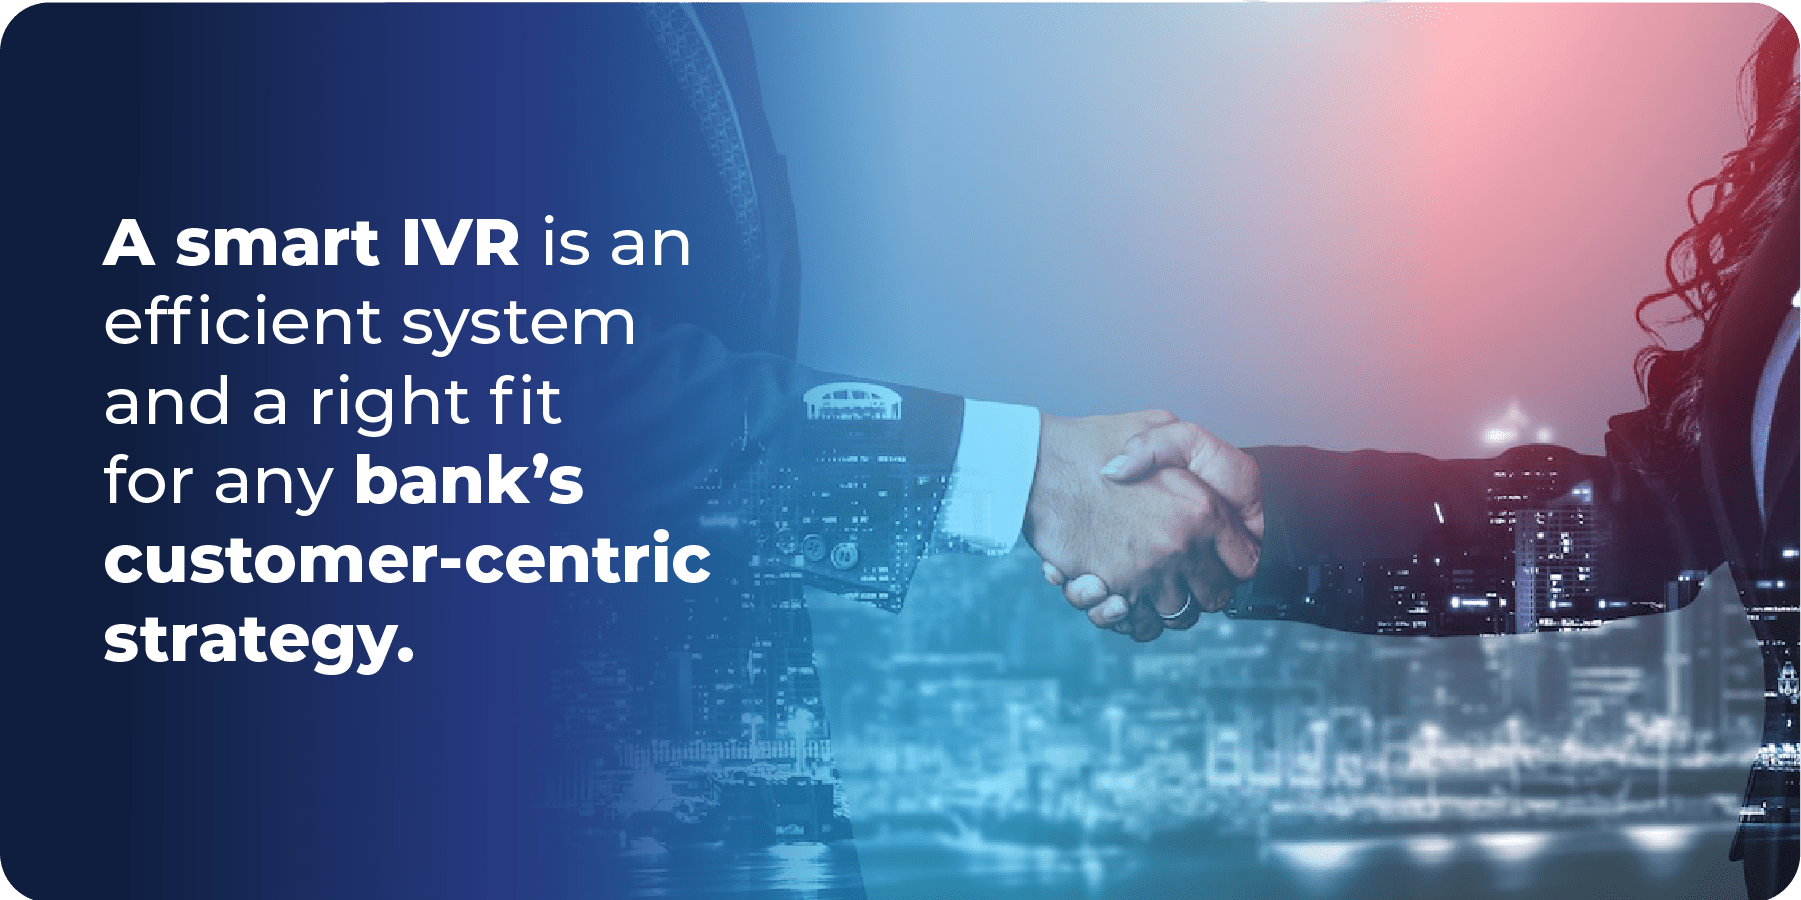 IVR is a right fit for any bank’s customer-centric strategy